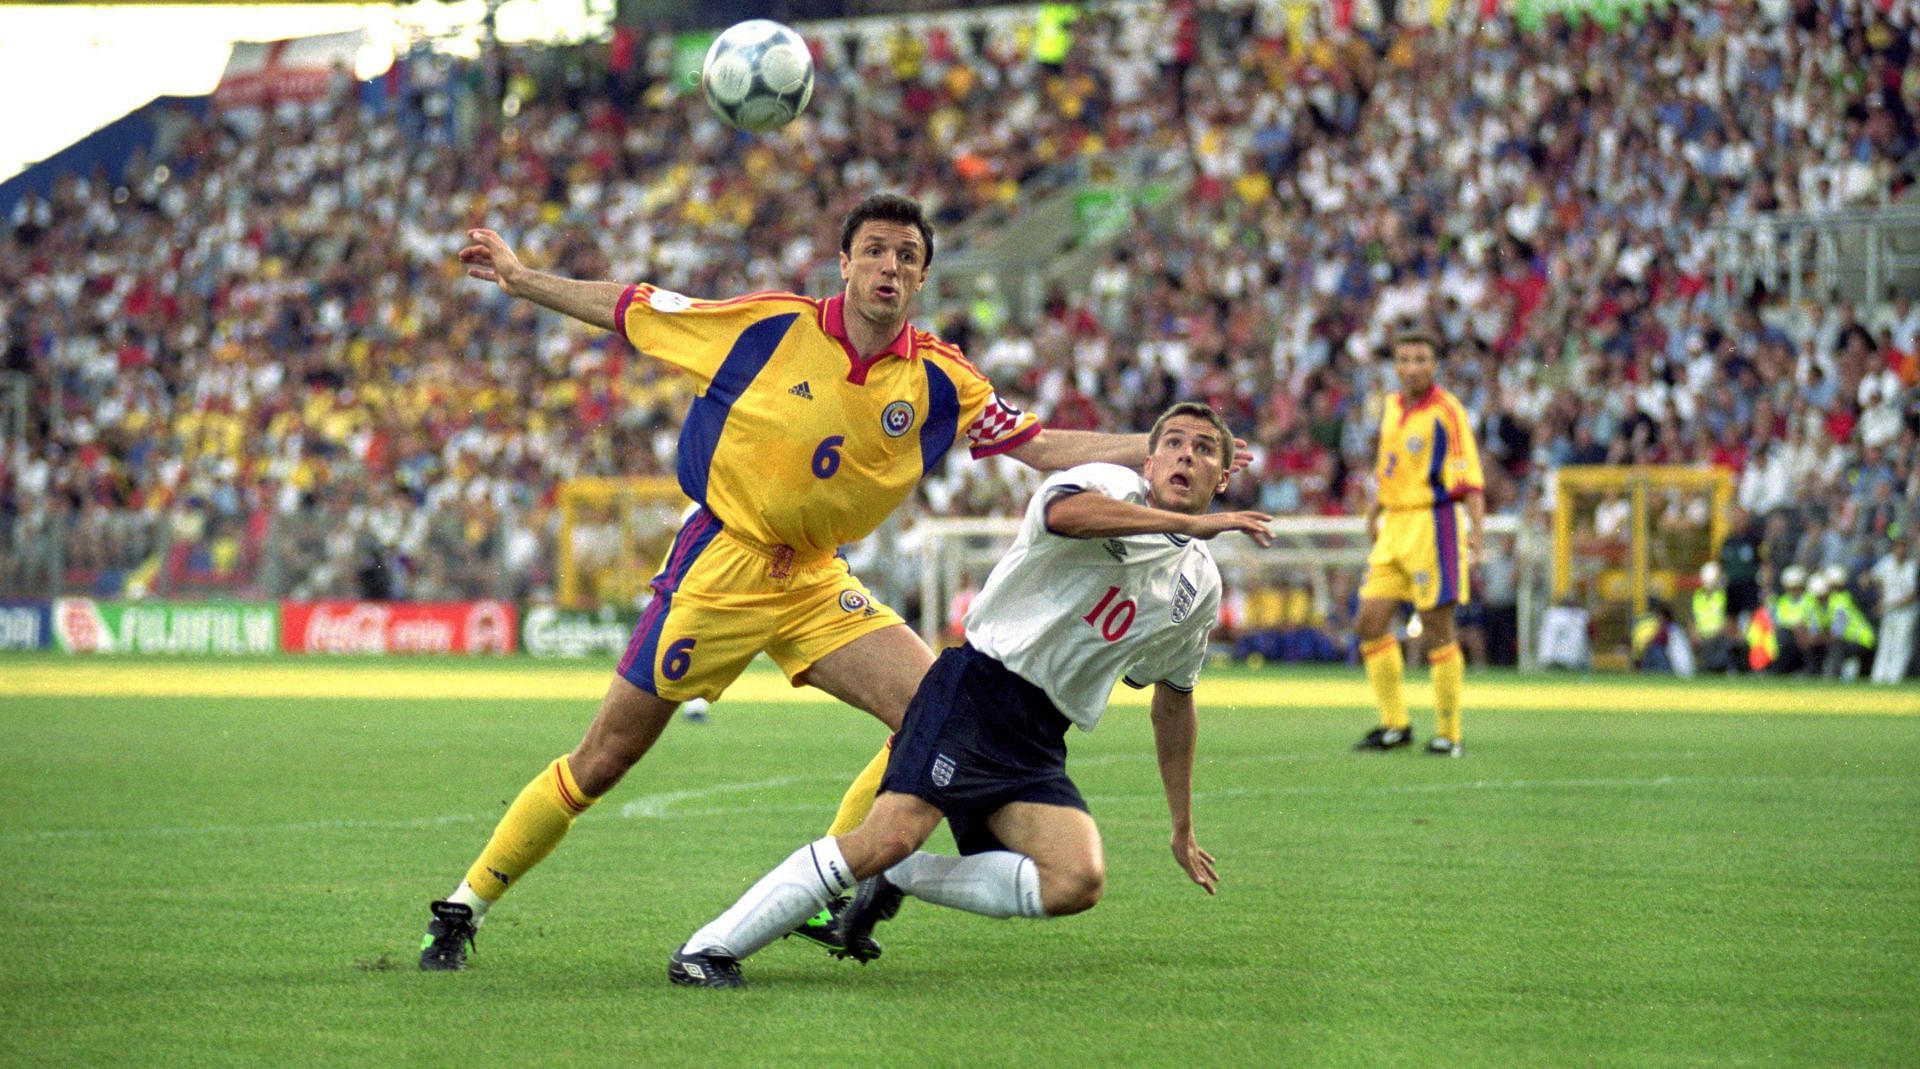 Former football player, Gheorghe Popescu (No.6) of Romania tussles with Michael Owen (No.10) of England during the European Championships 2000 Group A match at the Stade Communal, Charleroi, Belgium.